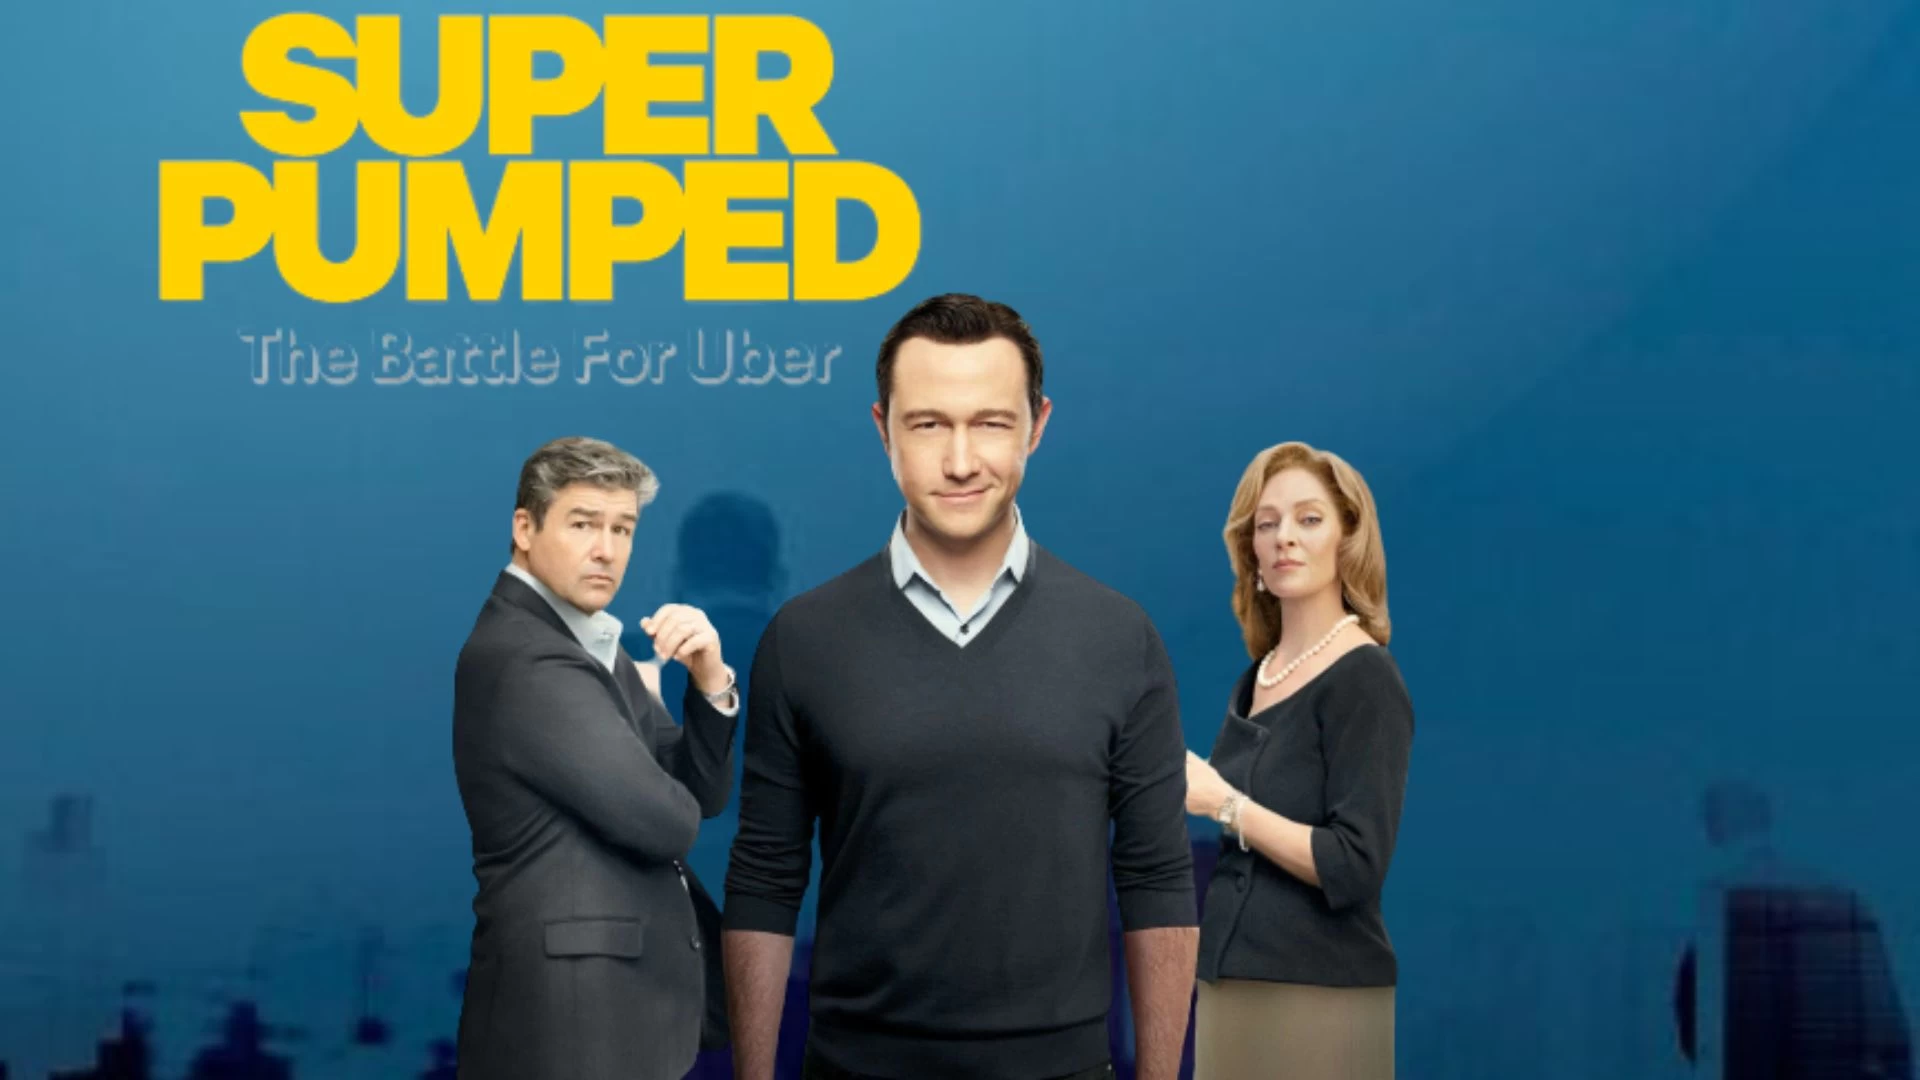 Is Super Pumped Based on a True Story? Super Pumped Release Date, Cast, Where to Watch, and More